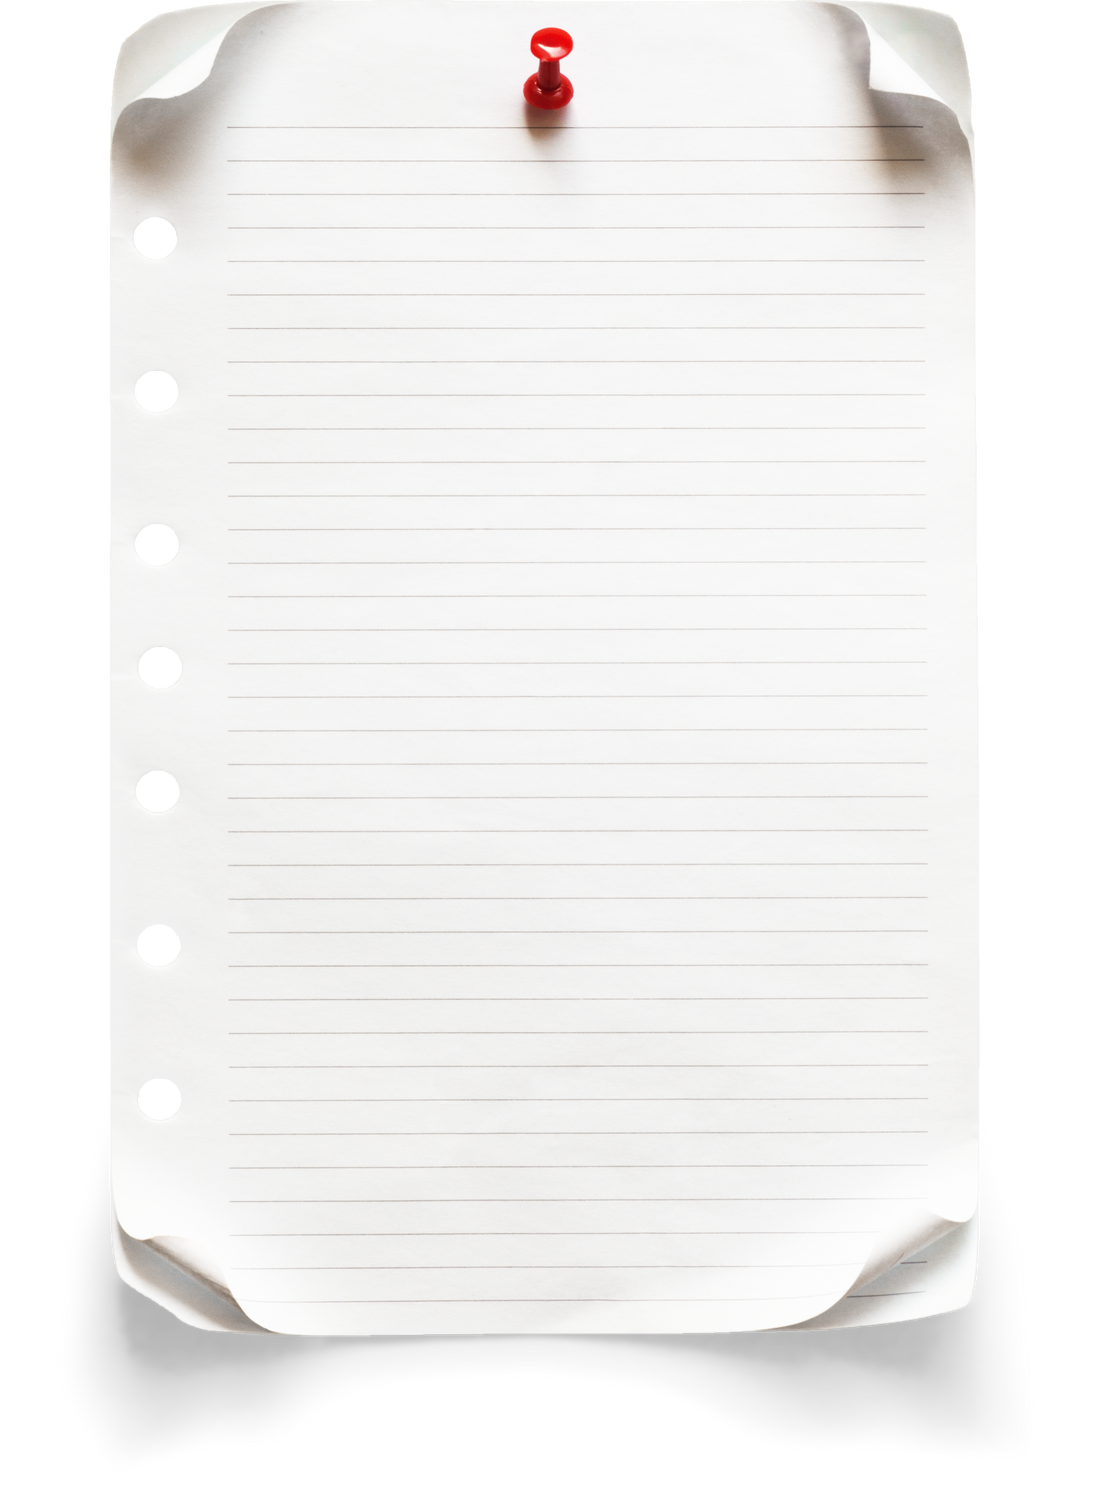 Blank Page with Pin